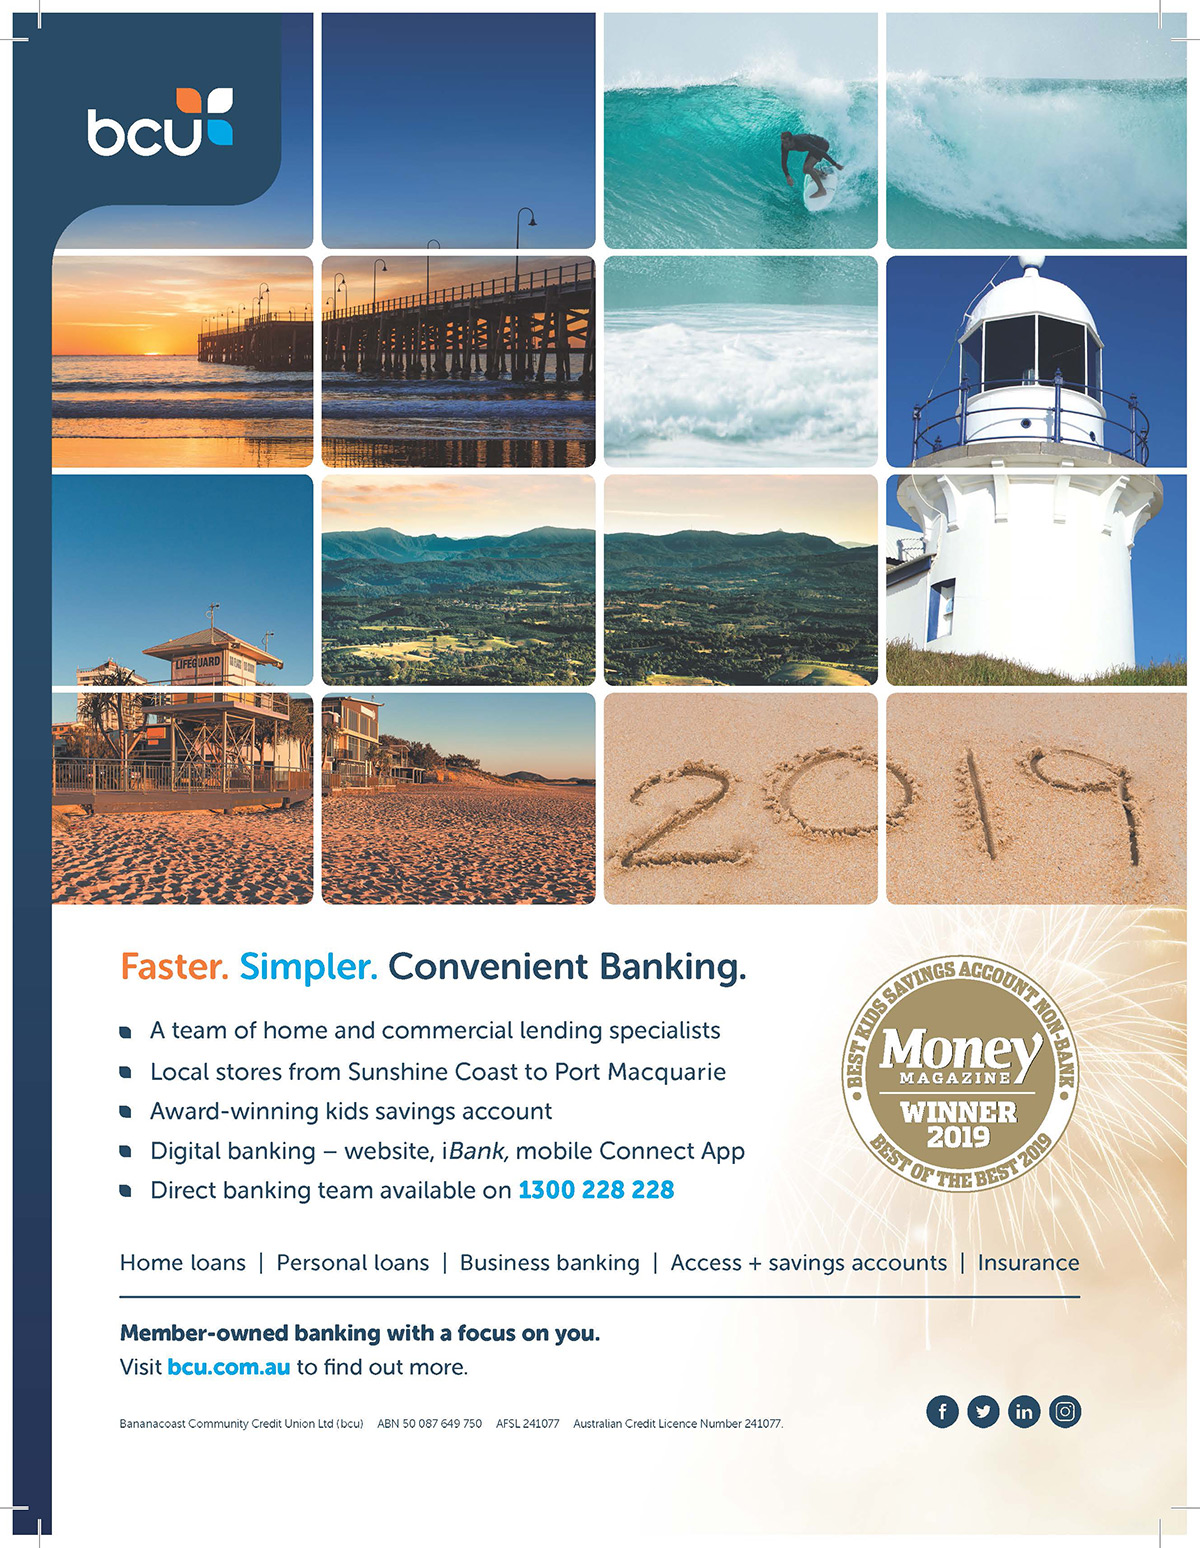 bcu excerpt from the Money Magazine Best of the Best issue November 29 2018